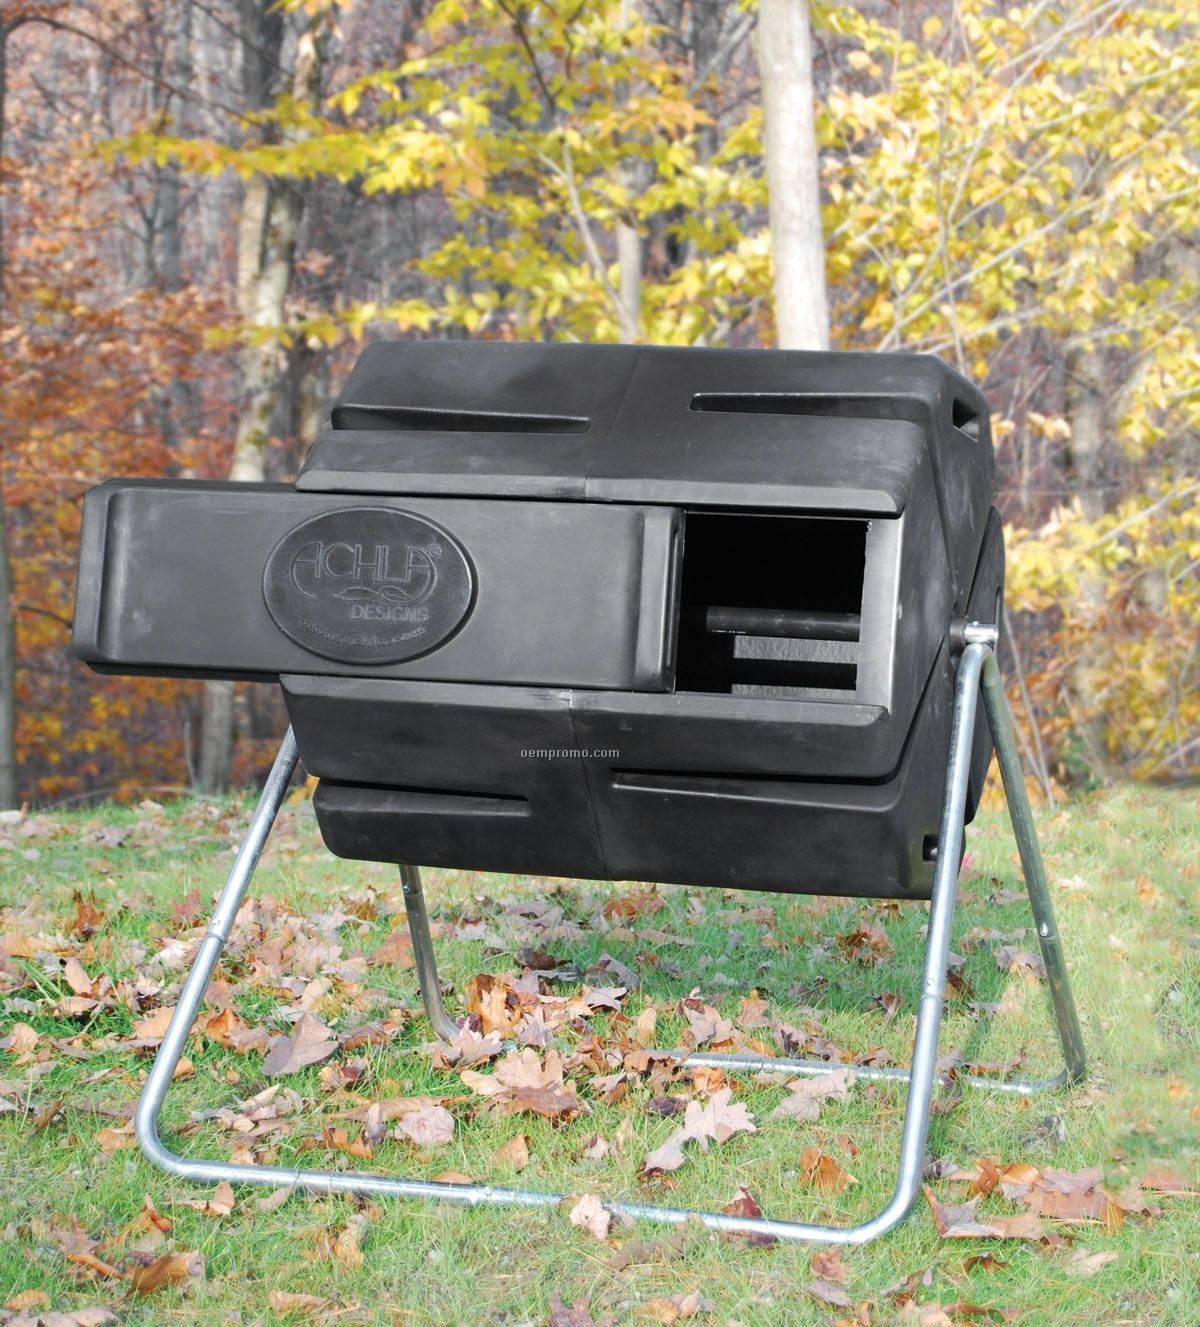 Achla Spinning Horizontal Composter